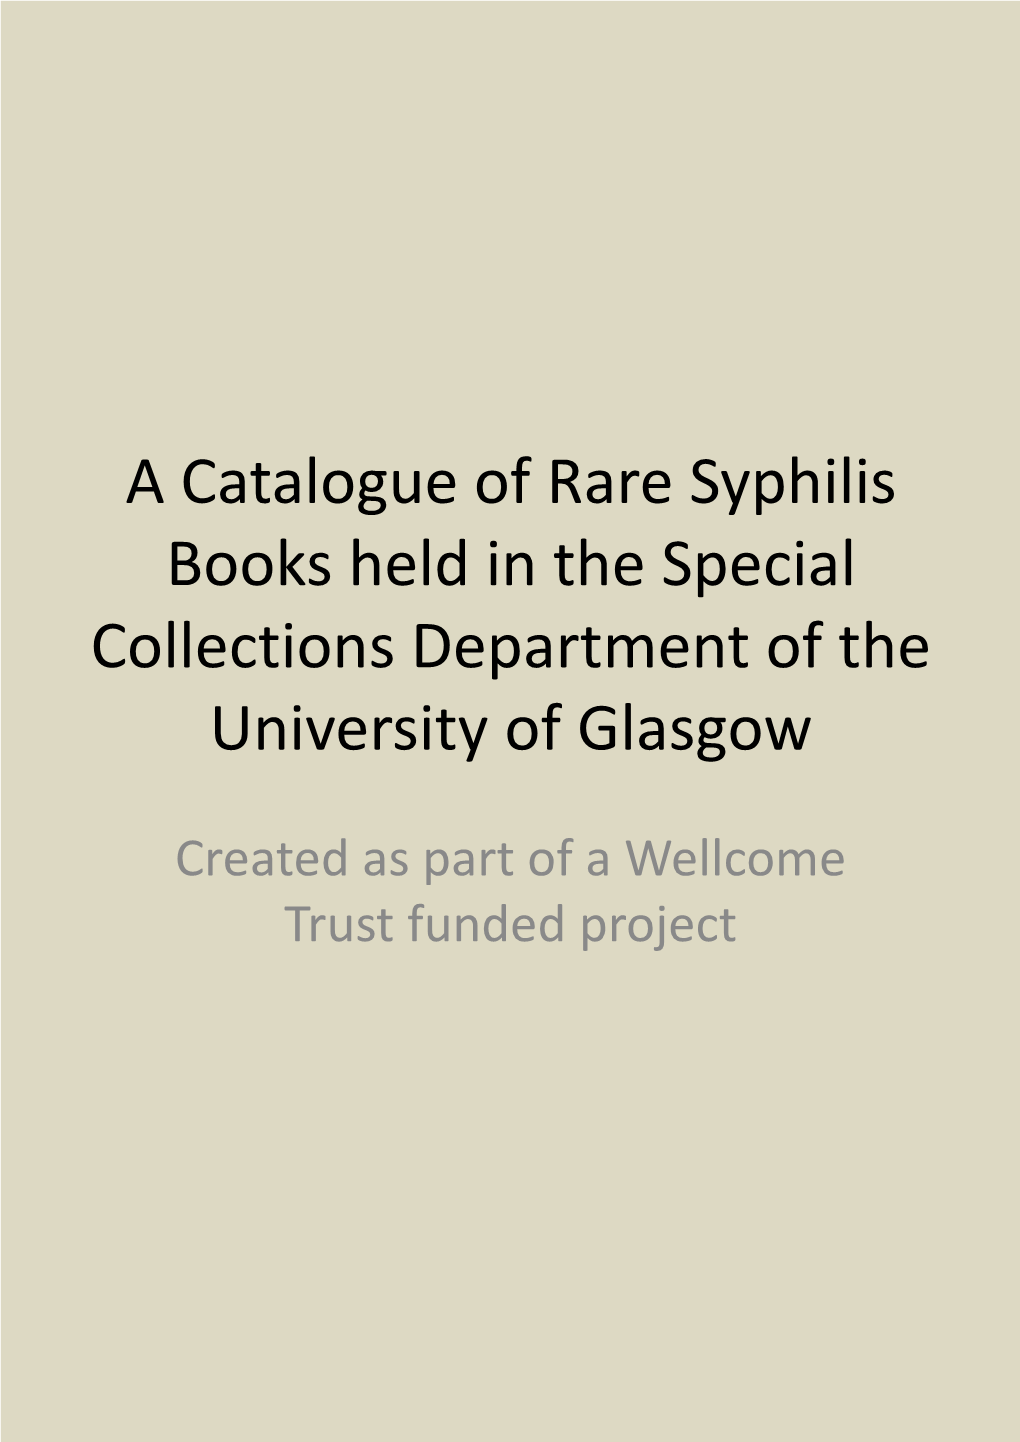 A Catalogue of Rare Syphilis Books Held in the Special Collections Department of the University of Glasgow